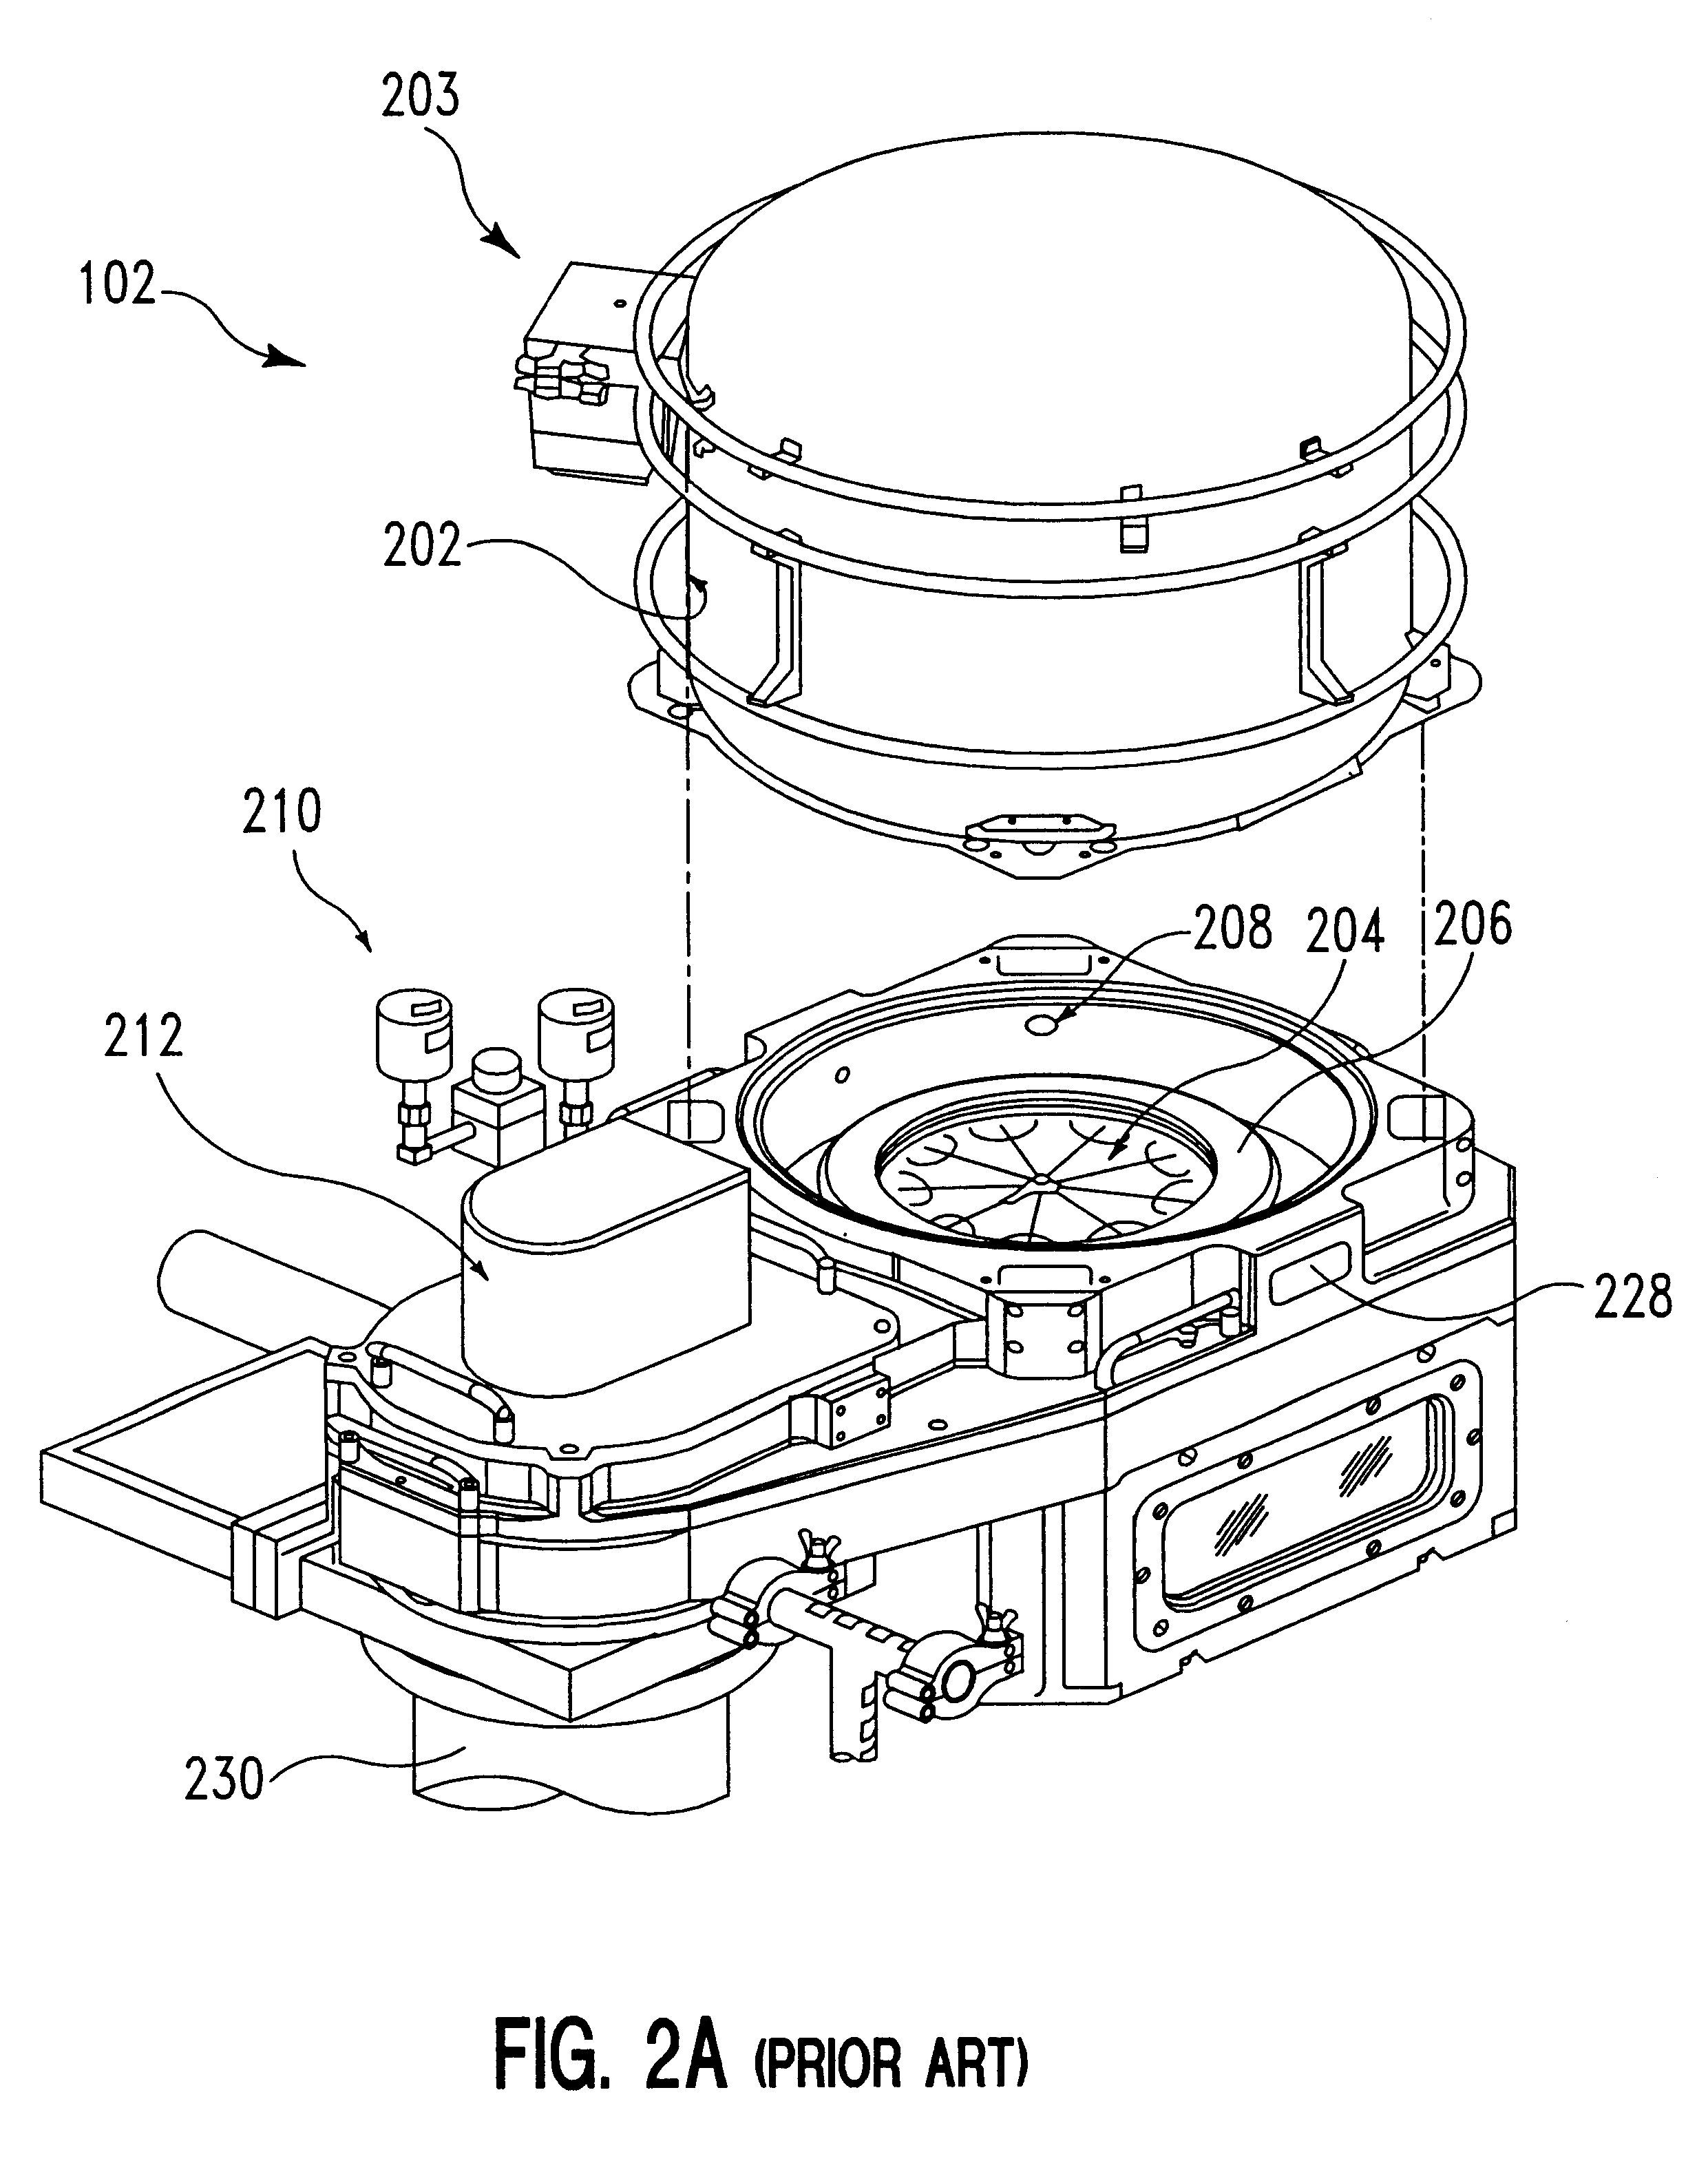 Method of cleaning a semiconductor device processing chamber after a copper etch process